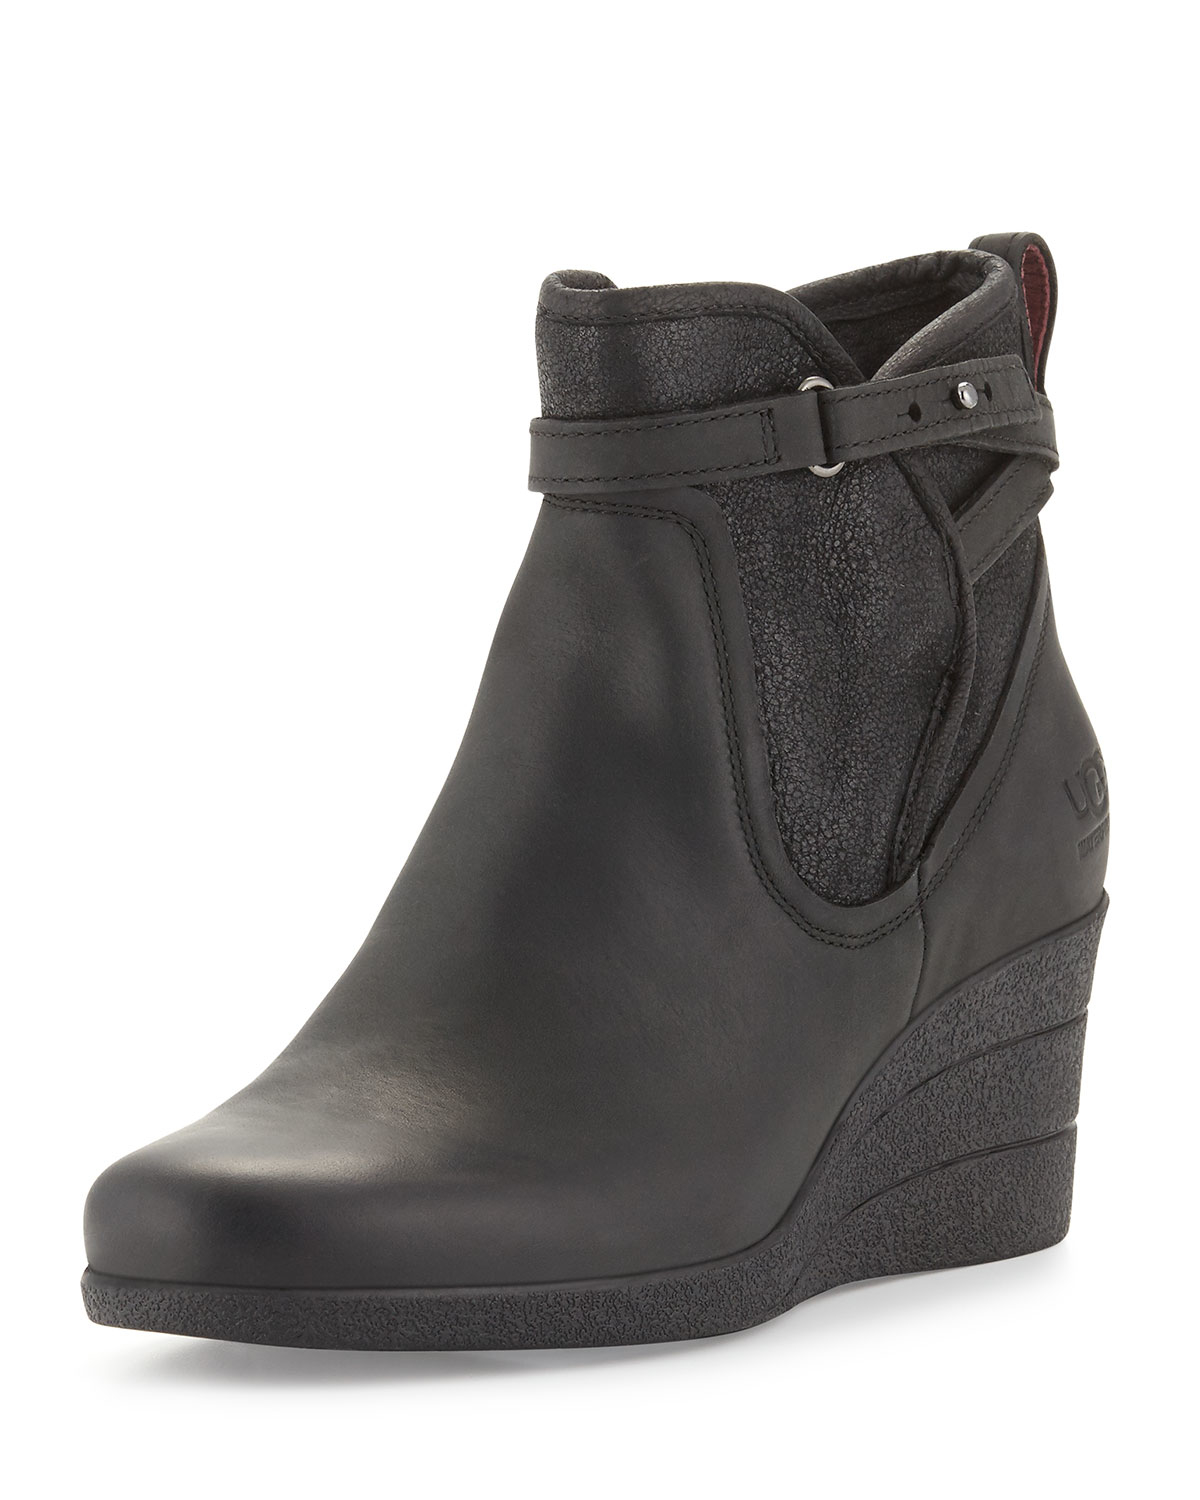 Lyst - Ugg Emalie Leather Wedge Boots in Black